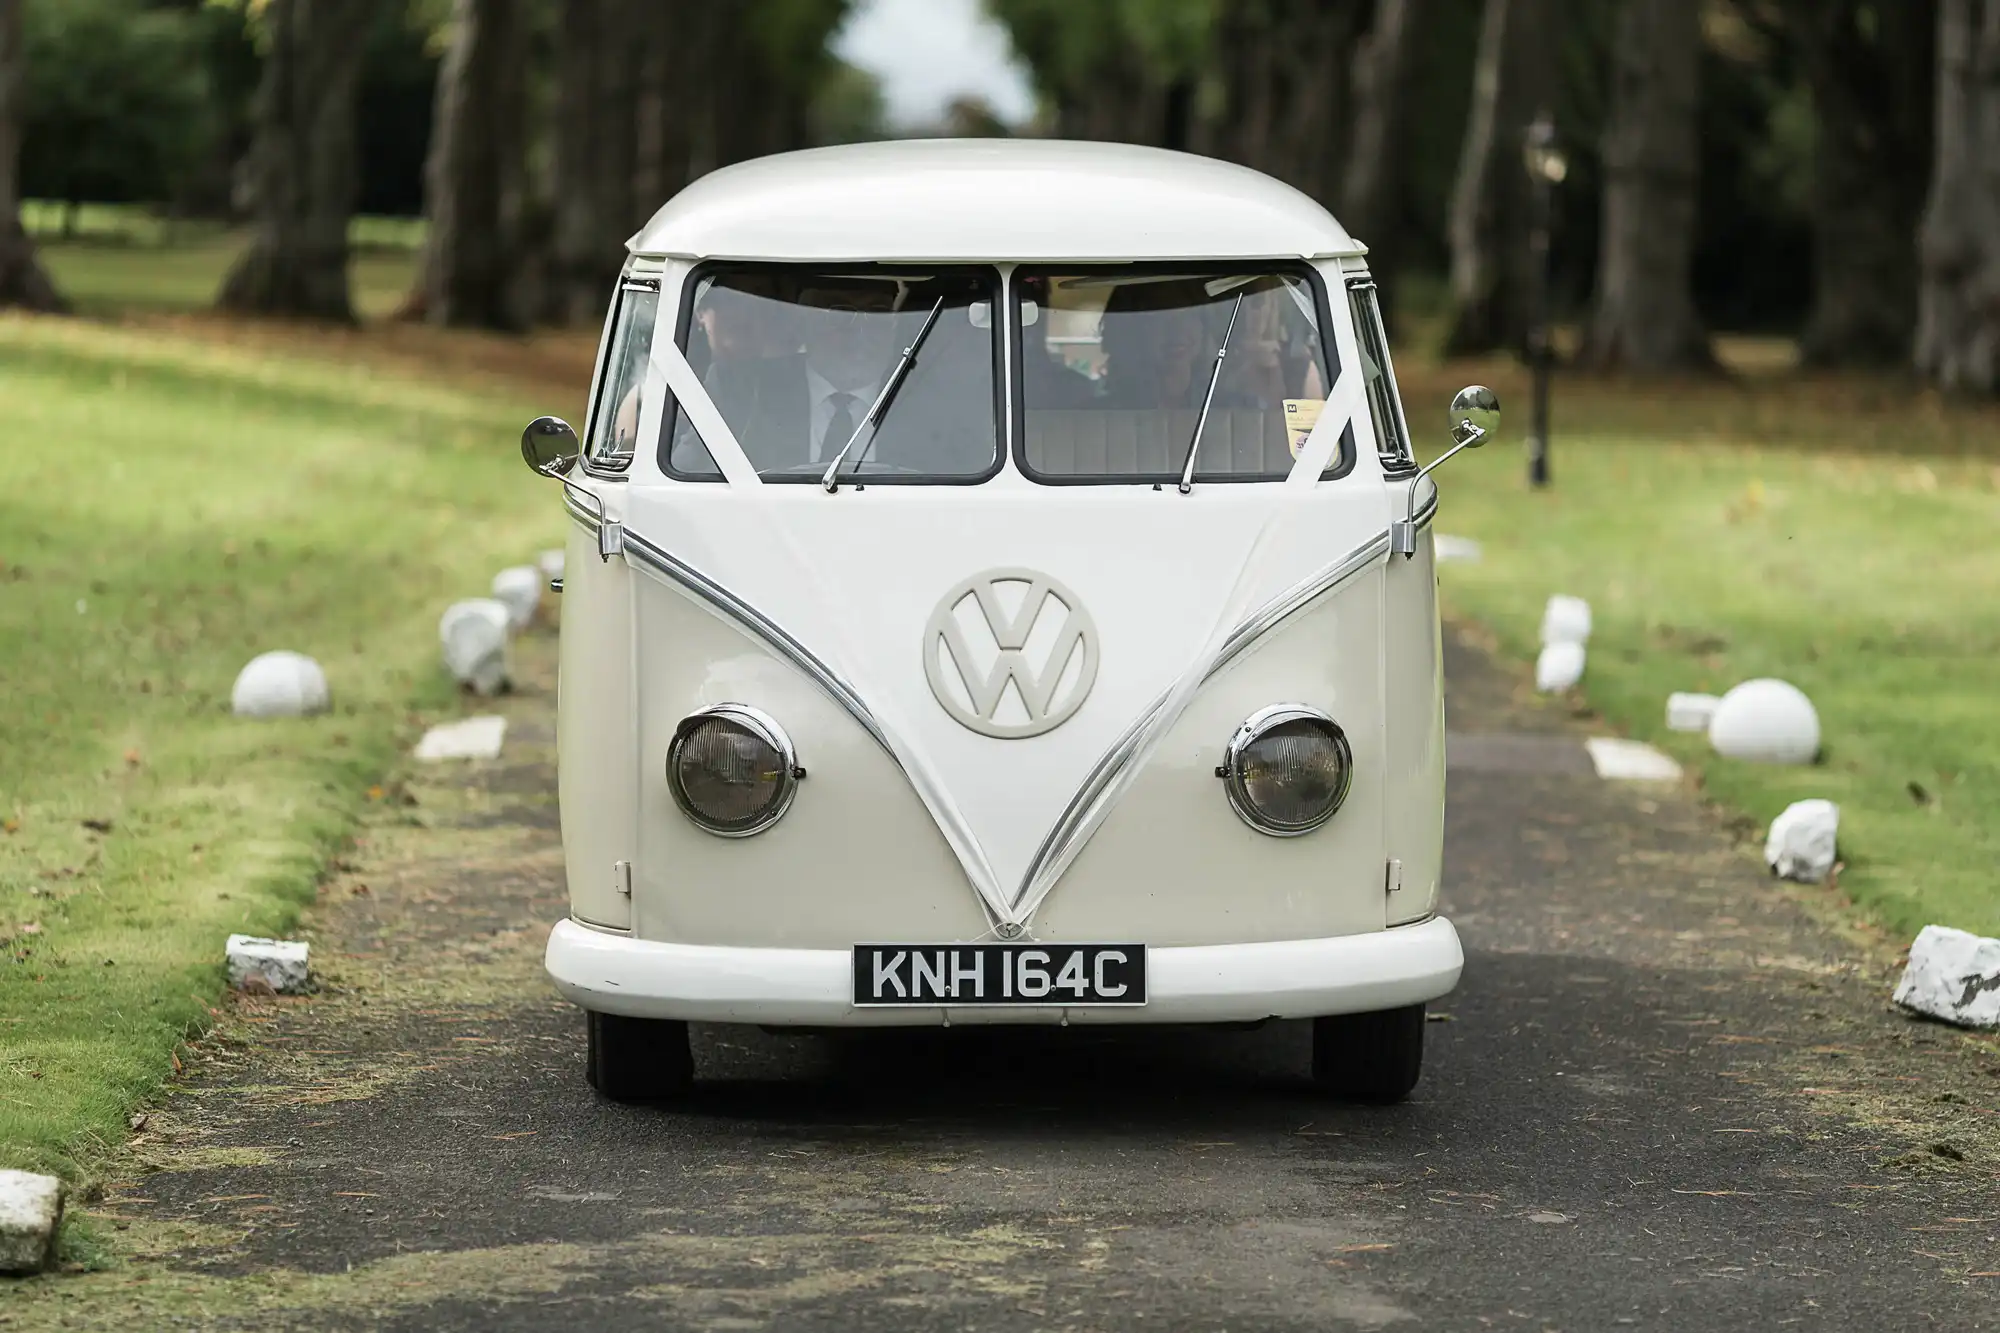 A vintage white volkswagen van parked on a tree-lined path, with license plate knh 164c.